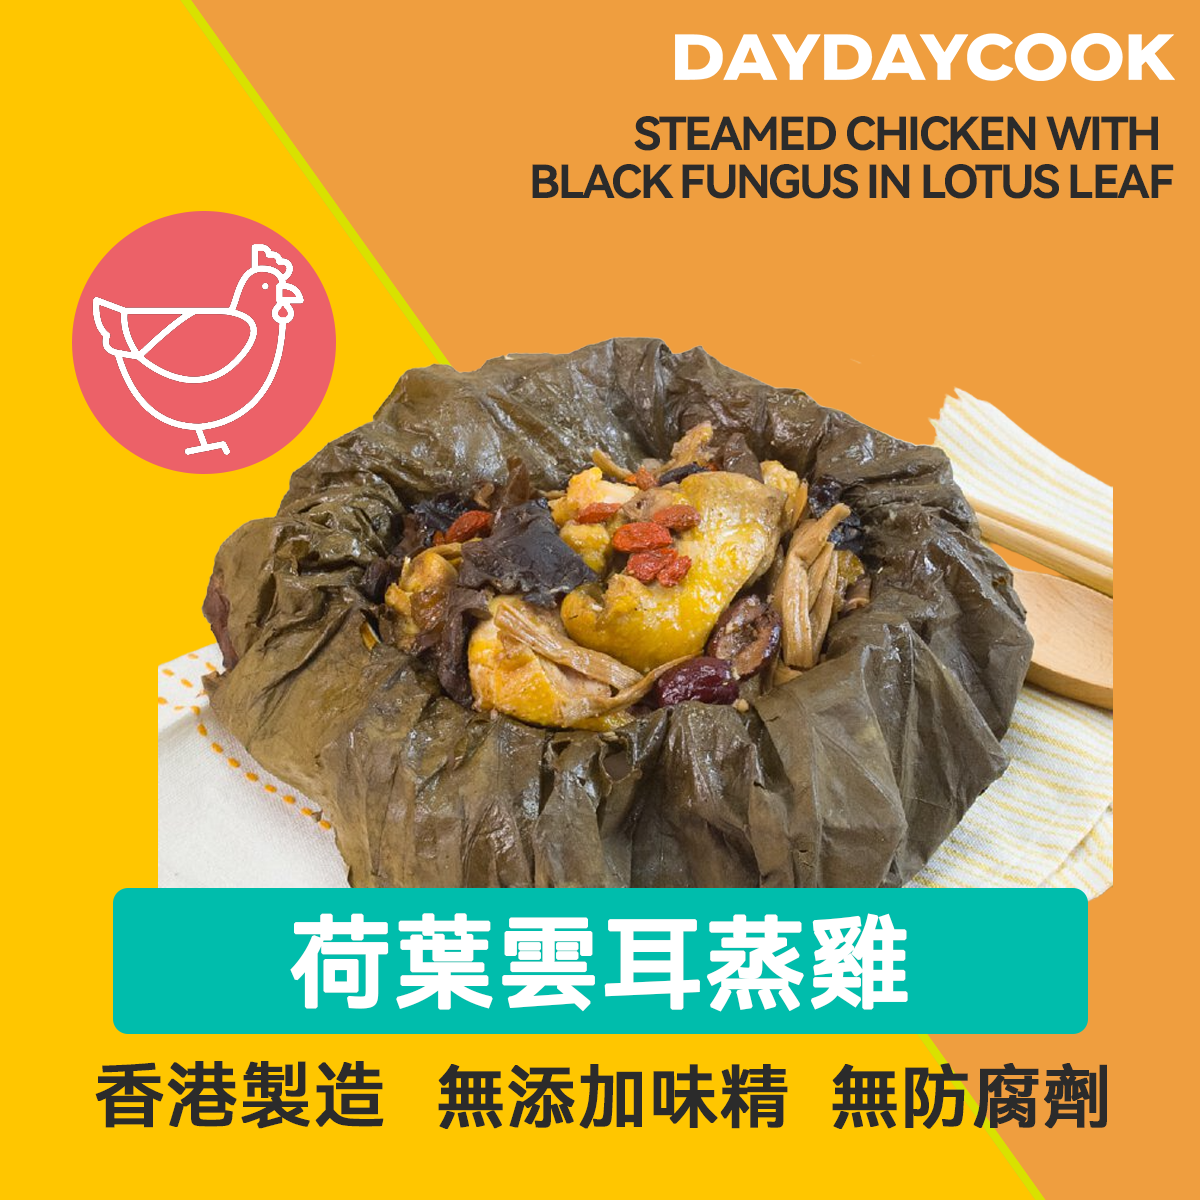 Steamed Chicken with Black Fungus in Lotus Leaf